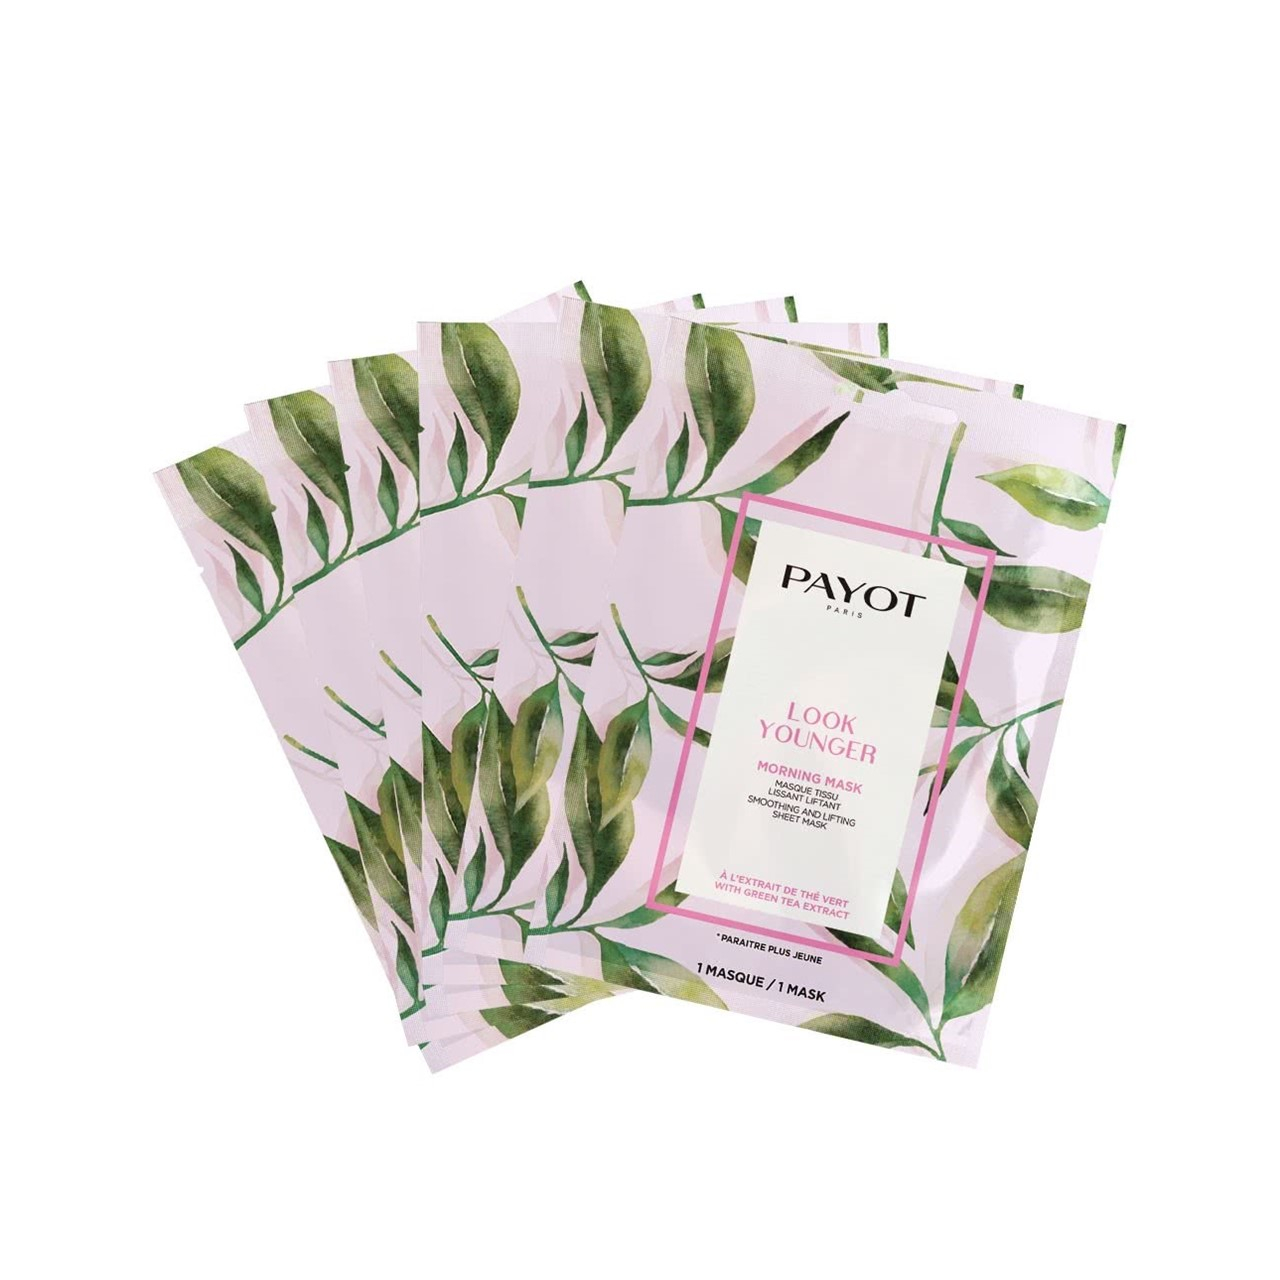 Payot Look Younger Morning Mask Smoothing and Lifting Sheet Mask x15